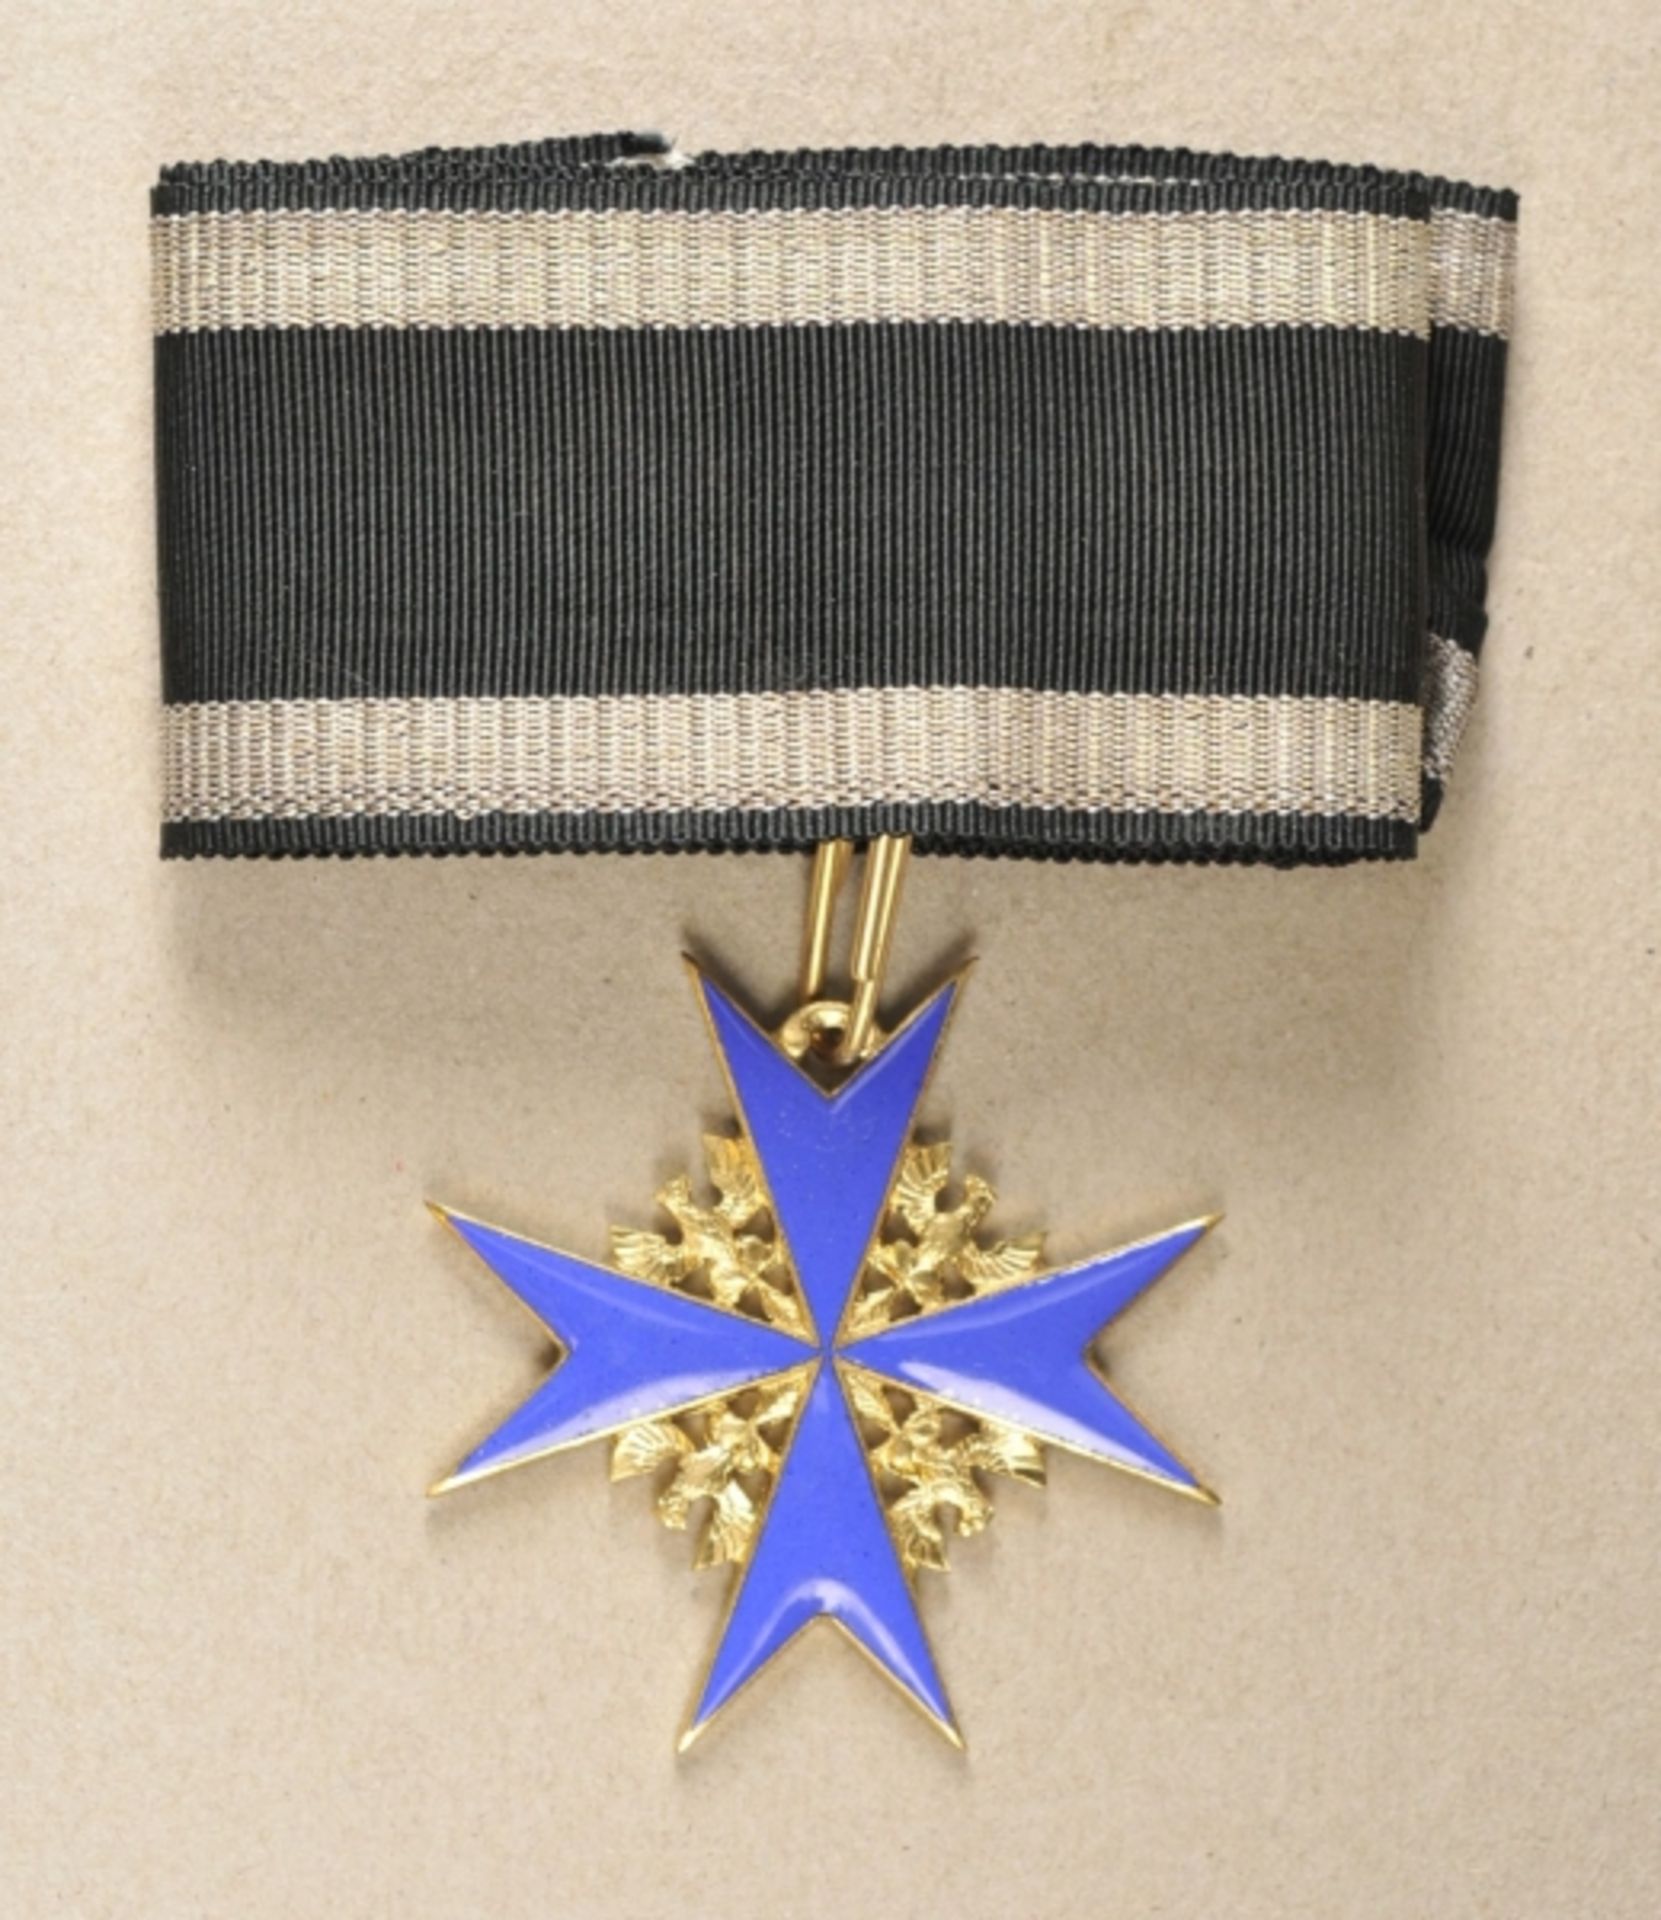 Prussia: Collerctors manifacture of the order Puor le mérite. Non-ferrous metal gilded and enameled, - Image 2 of 3